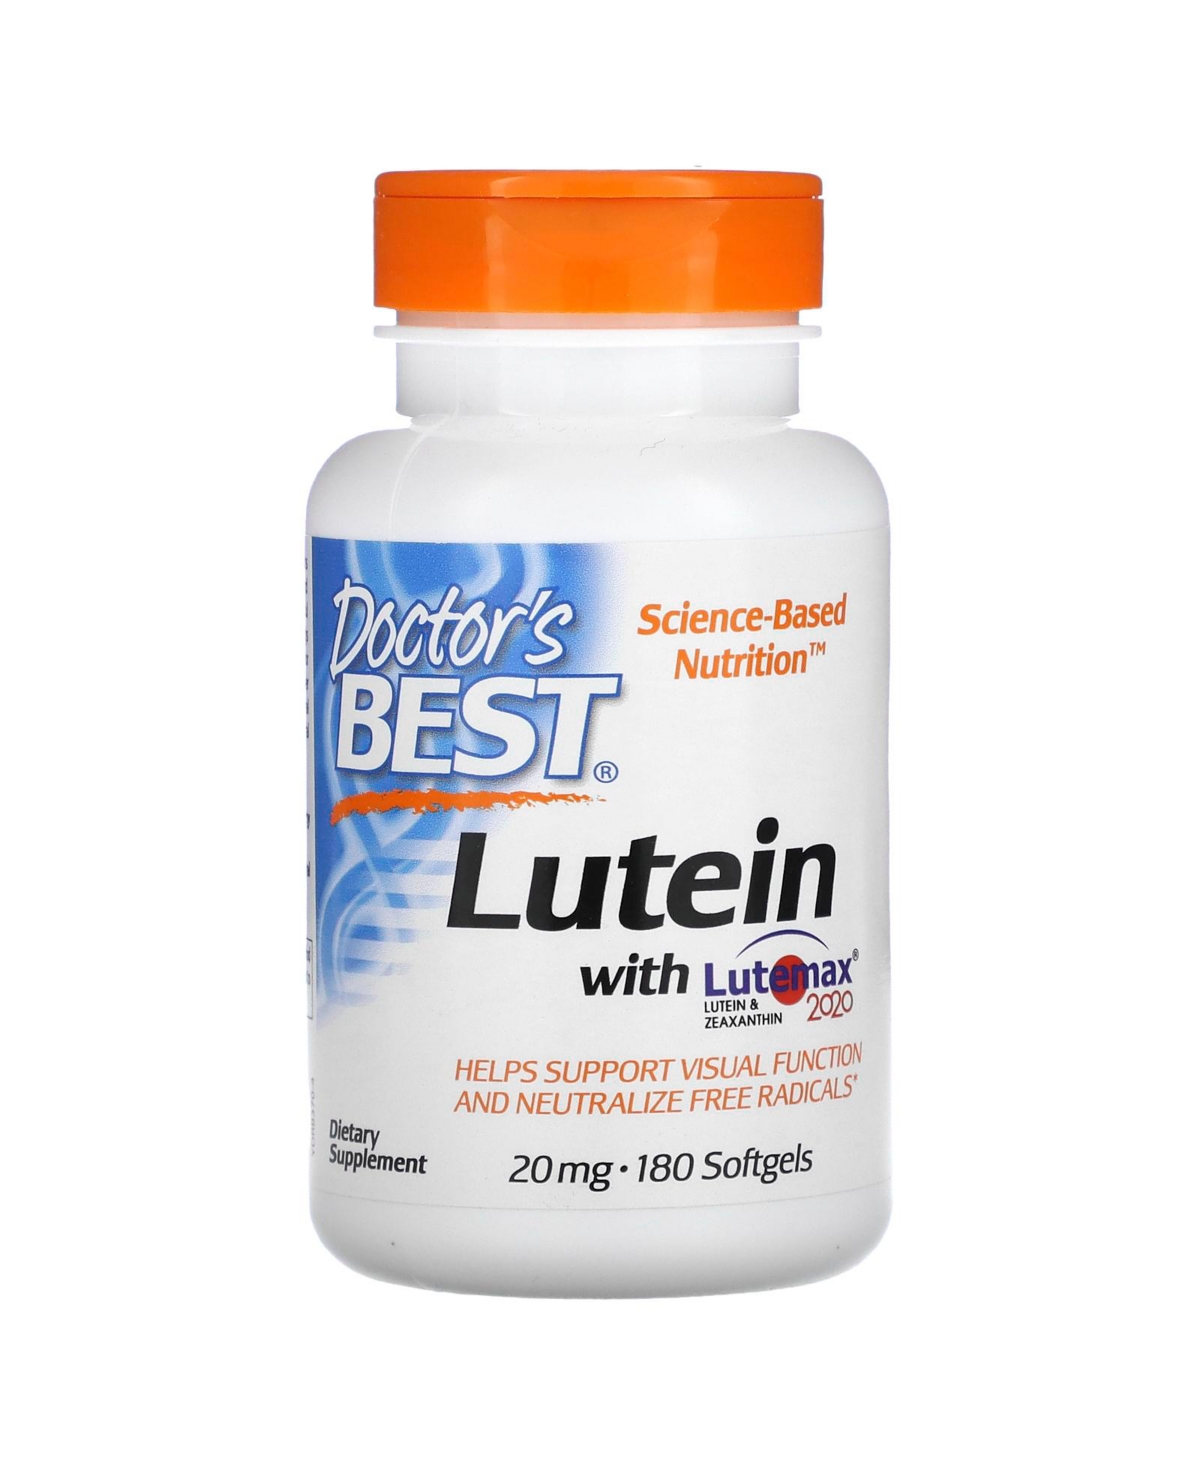 Lutein with Lutemax 2020 20 mg - 180 Softgels - Assorted Pre-pack (See Table